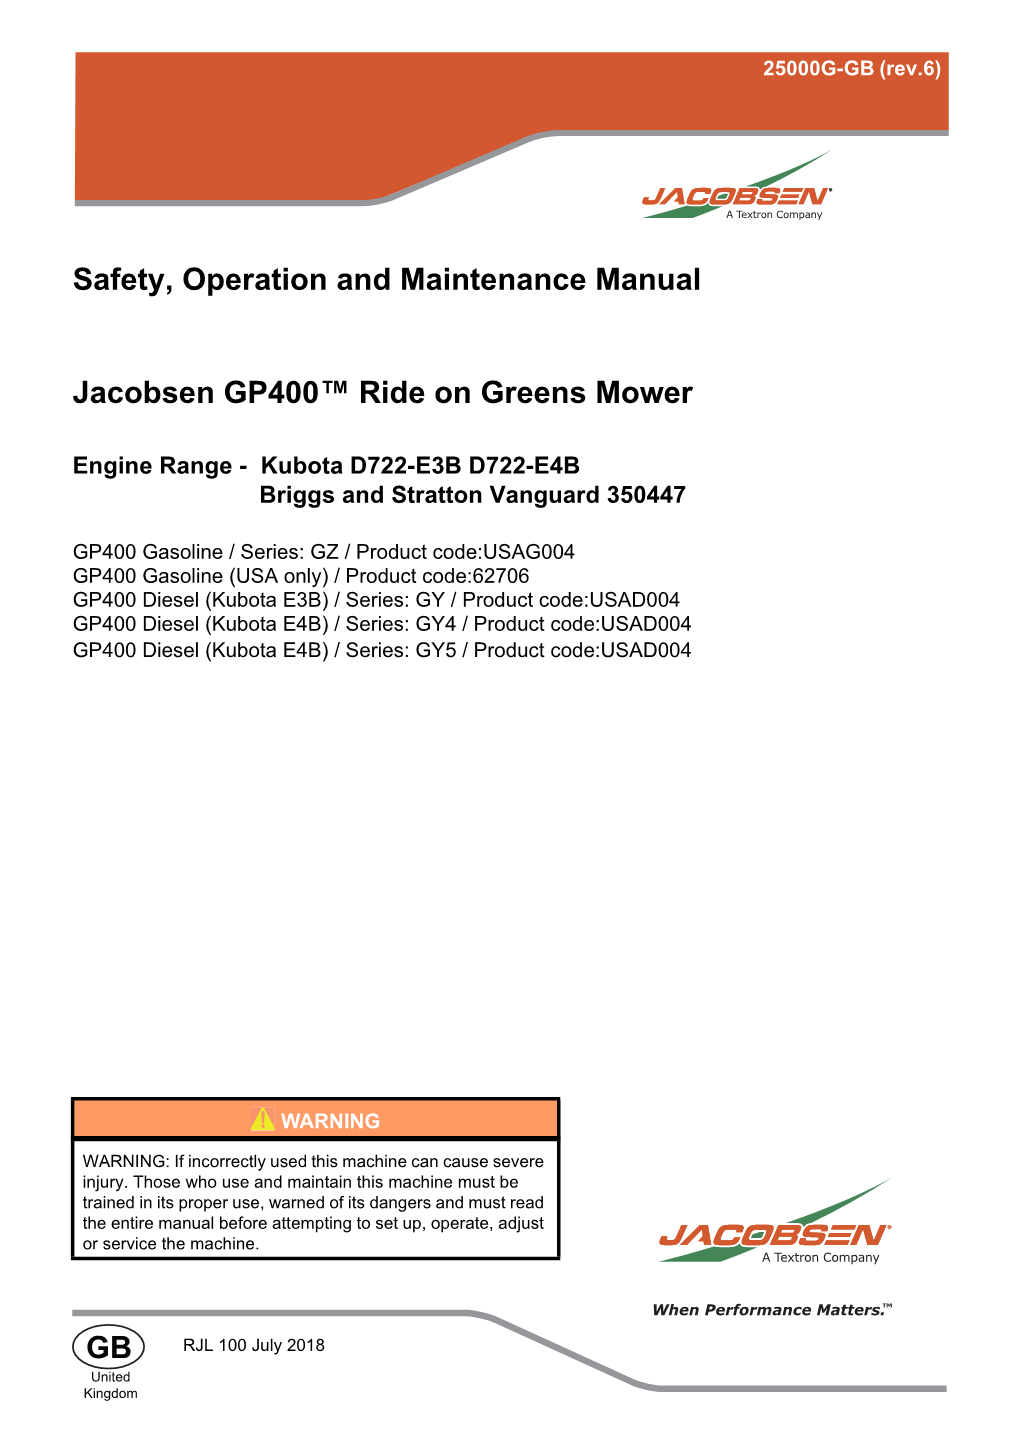 GB Safety, Operation and Maintenance Manual Jacobsen